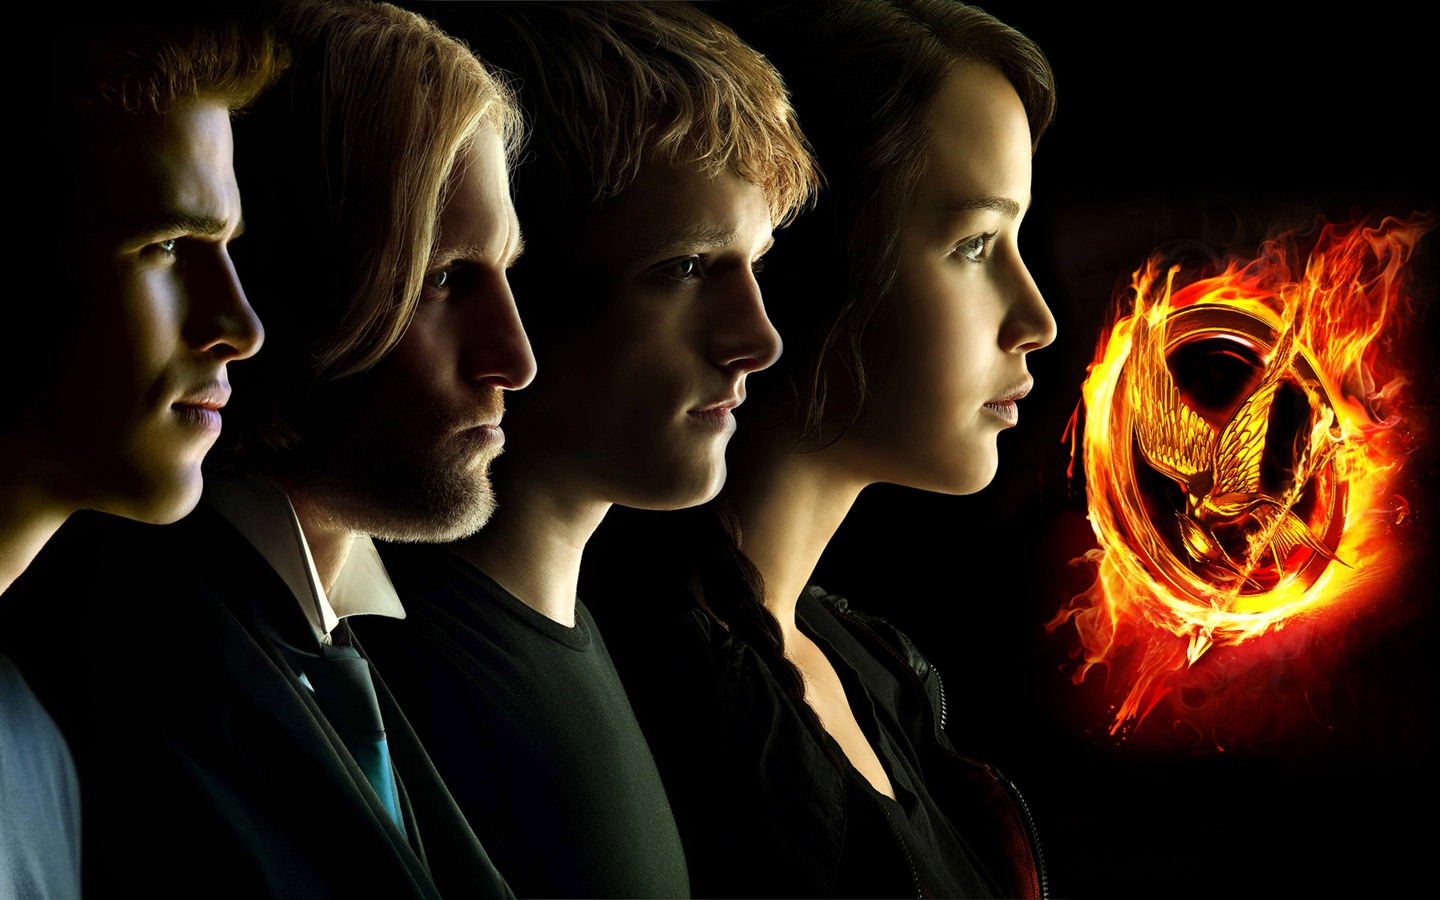 The Hunger Games HD wallpapers #9 - 1440x900